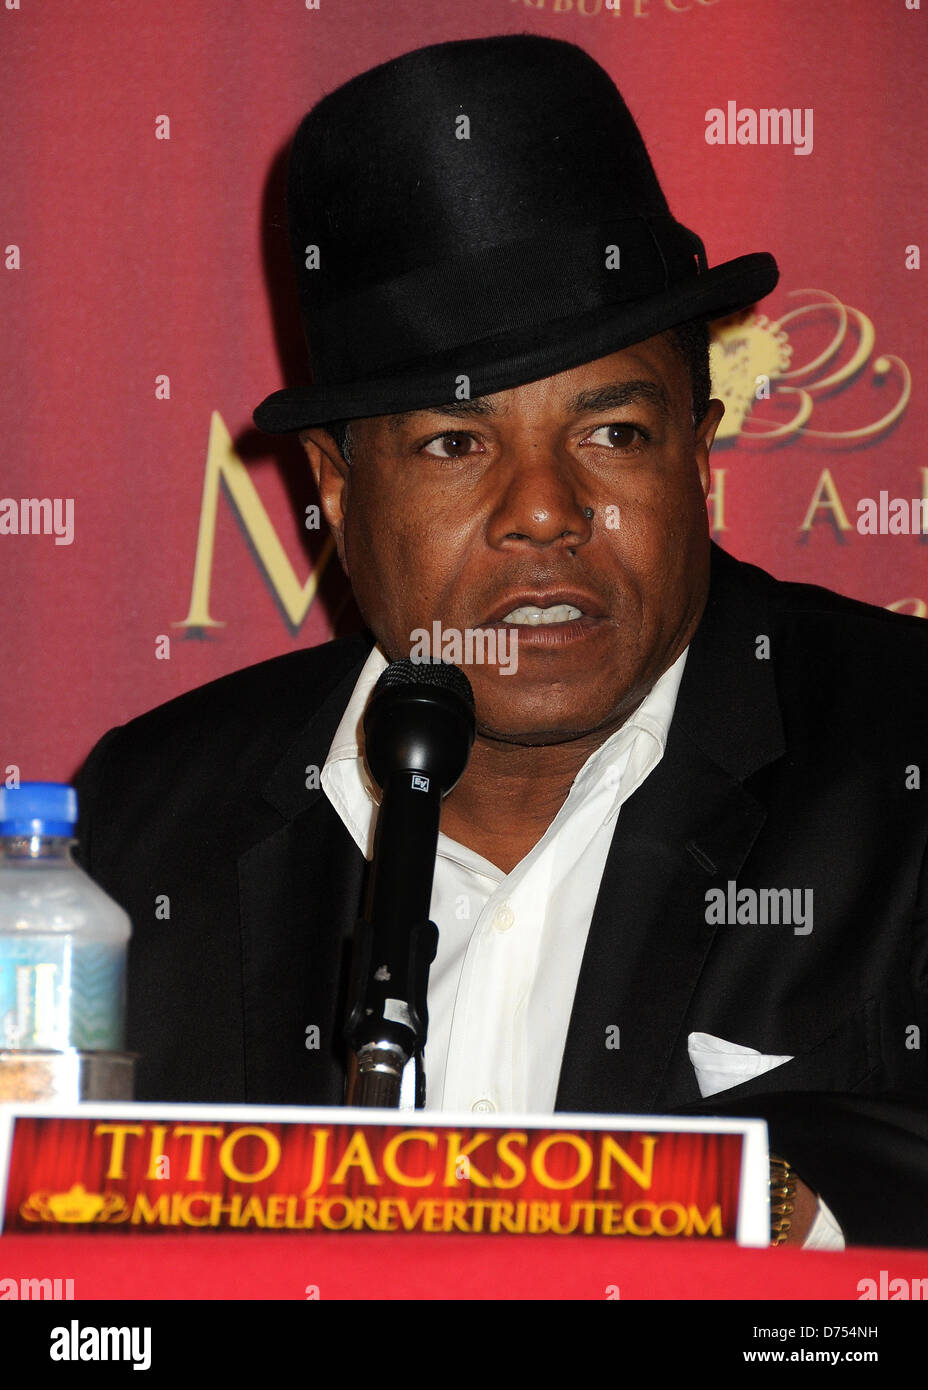 Tito Jackson 'Michael Forever The Tribute Concert' Press Conference held at The Beverly Hills Hotel Los Angeles, California - 25.07.11 Stock Photo